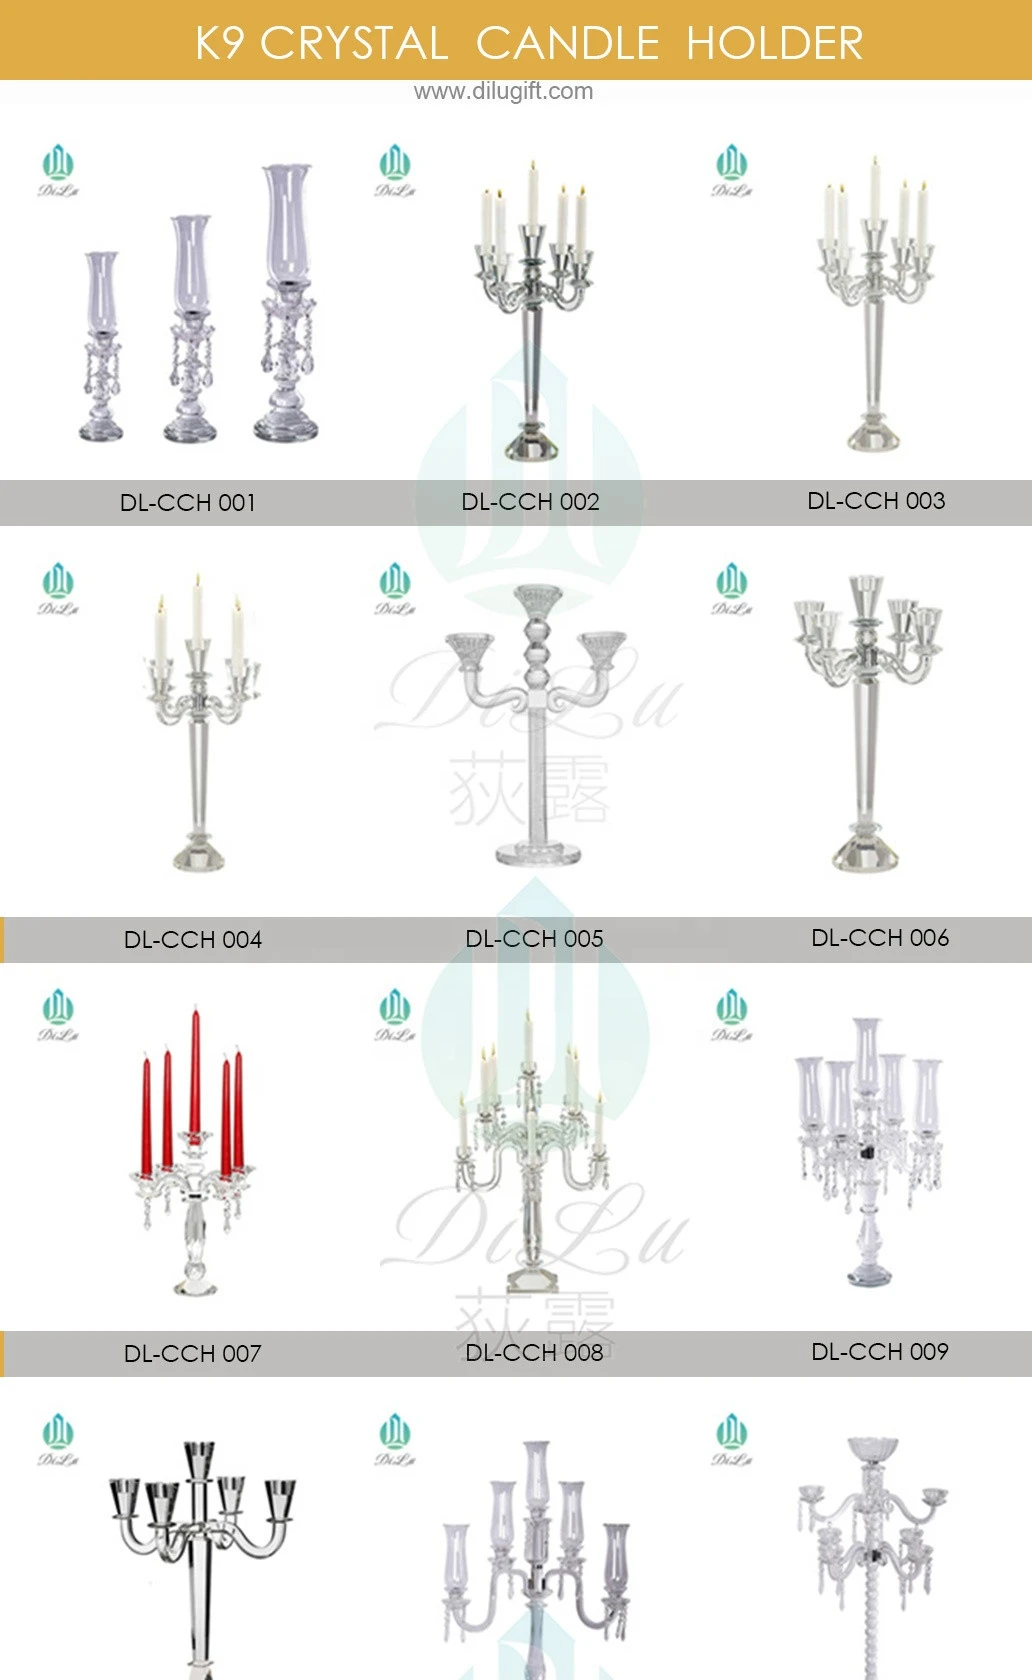 Europe style home goods crystal candlestick candle holder for home decor/crystal candle holder wedding centerpieces